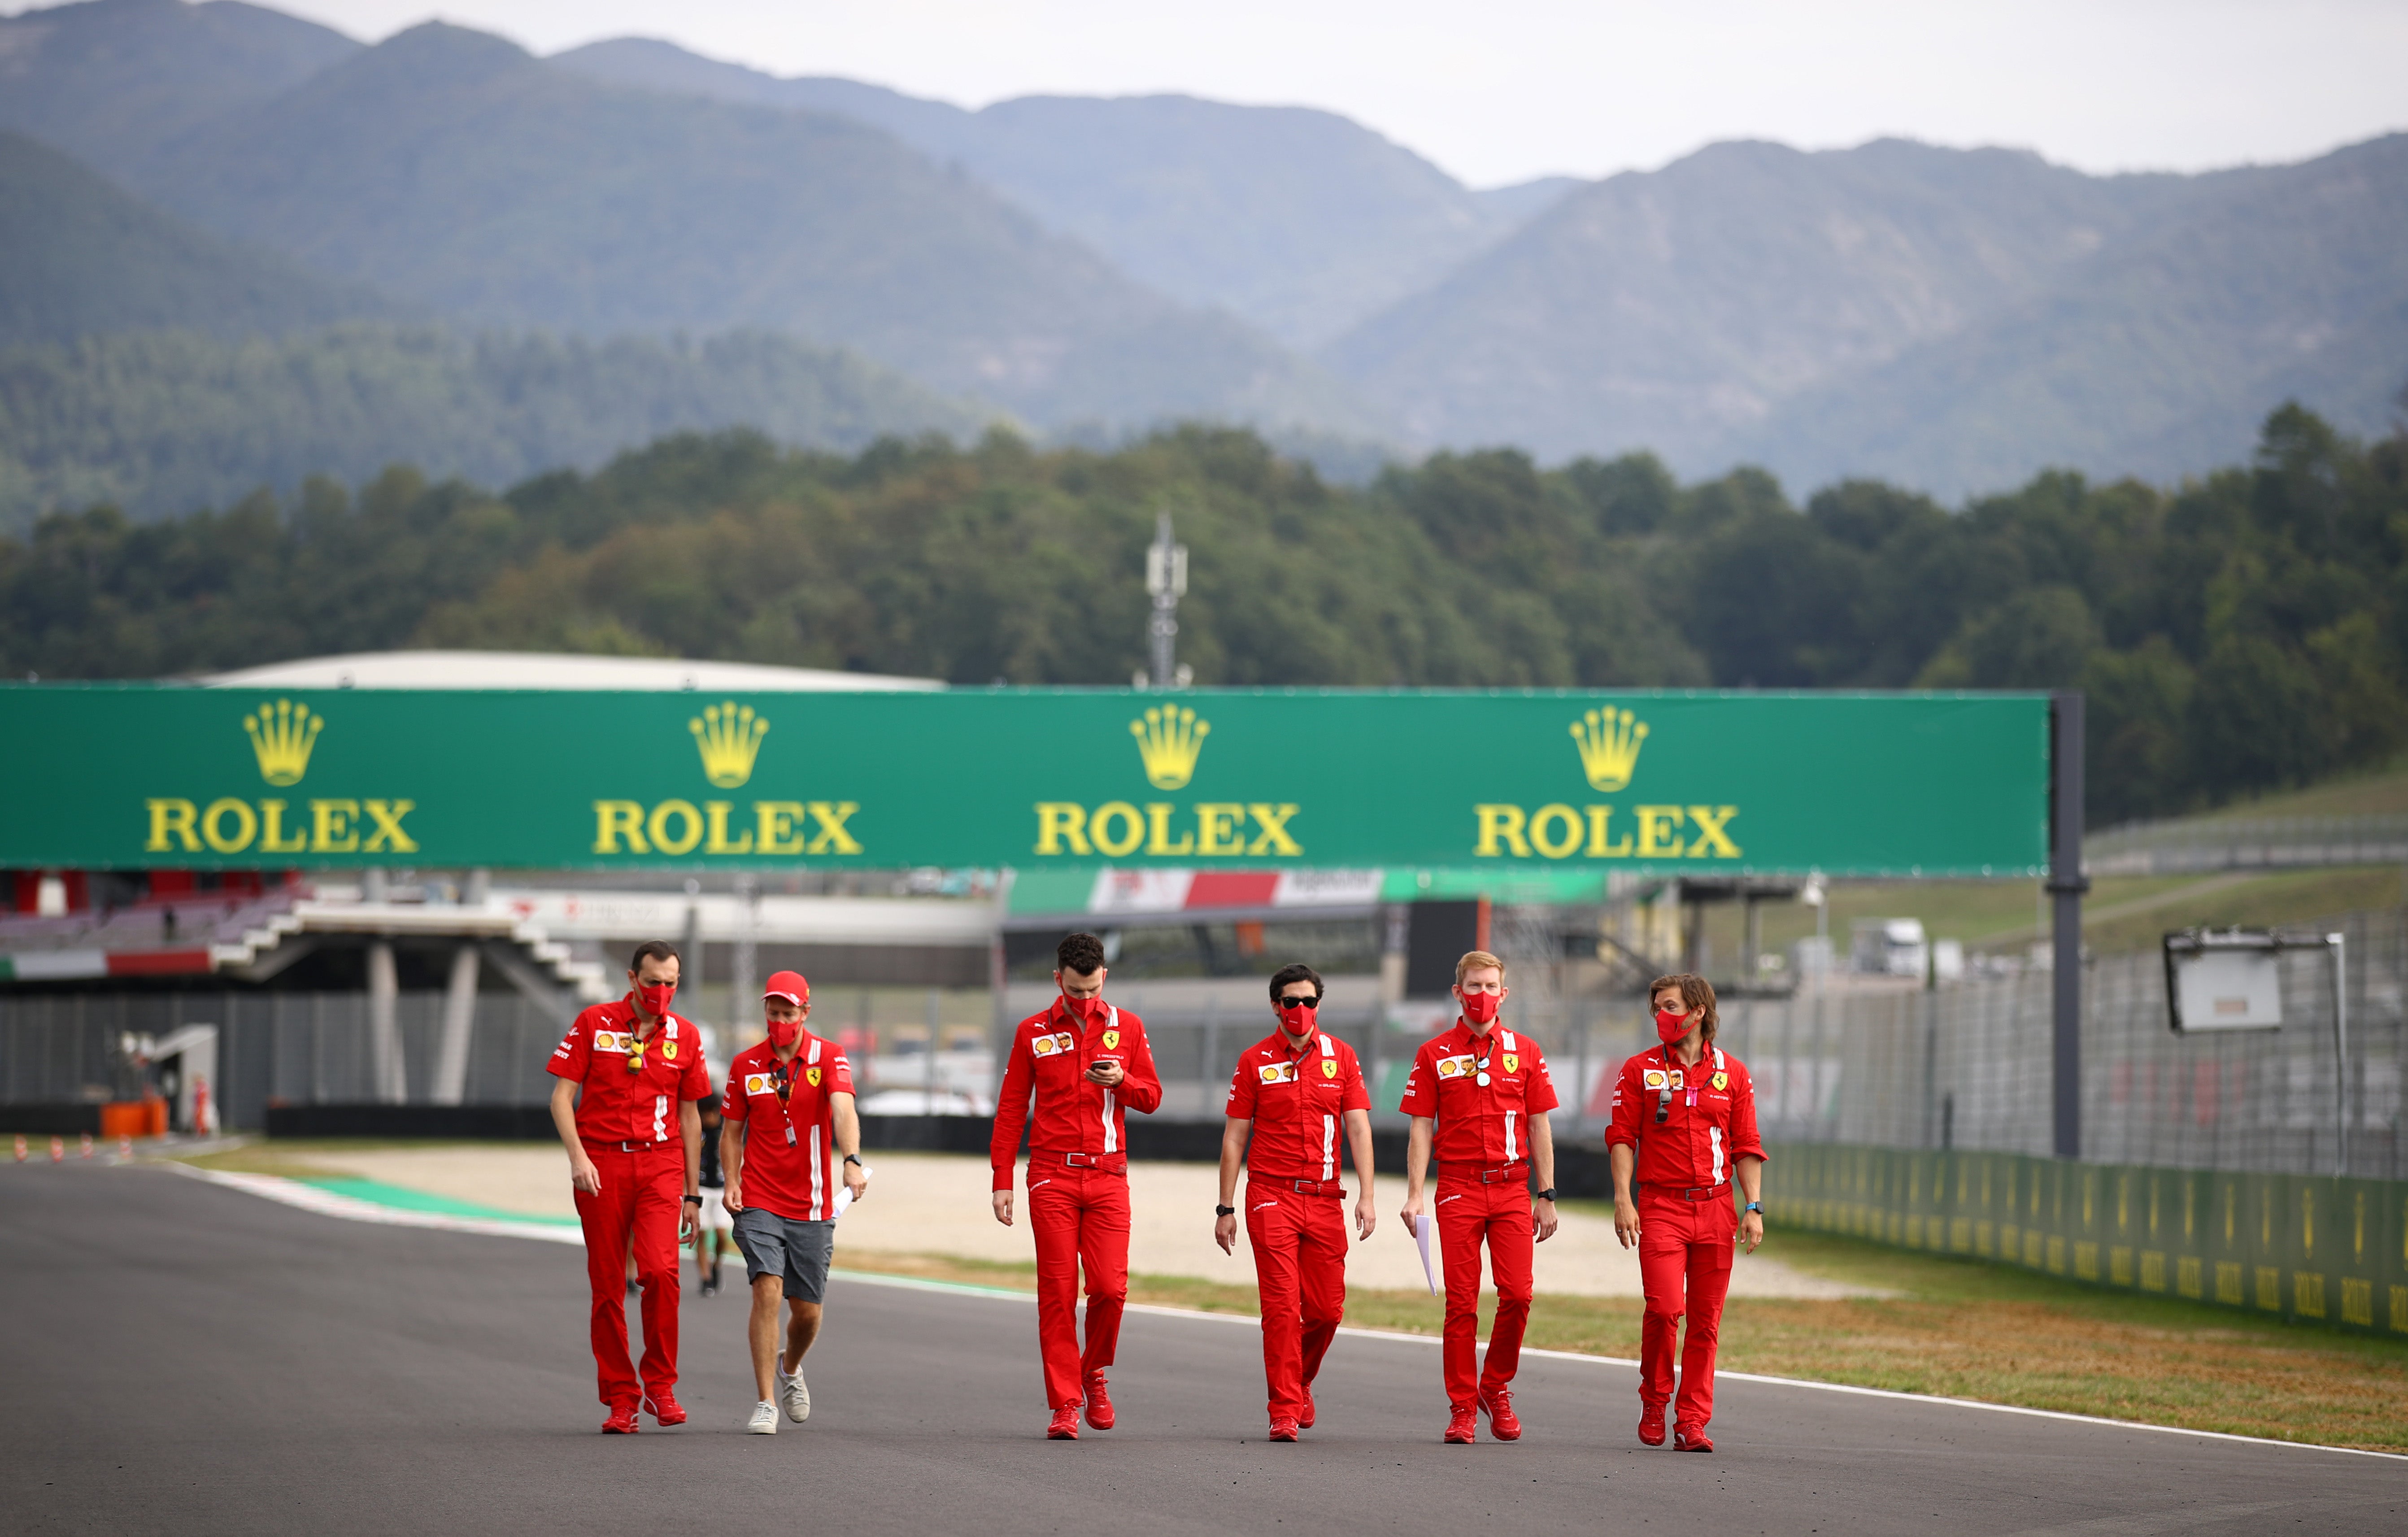 Ferrari will hope for a change of fortunes at Mugello for the Tuscan Grand Prix